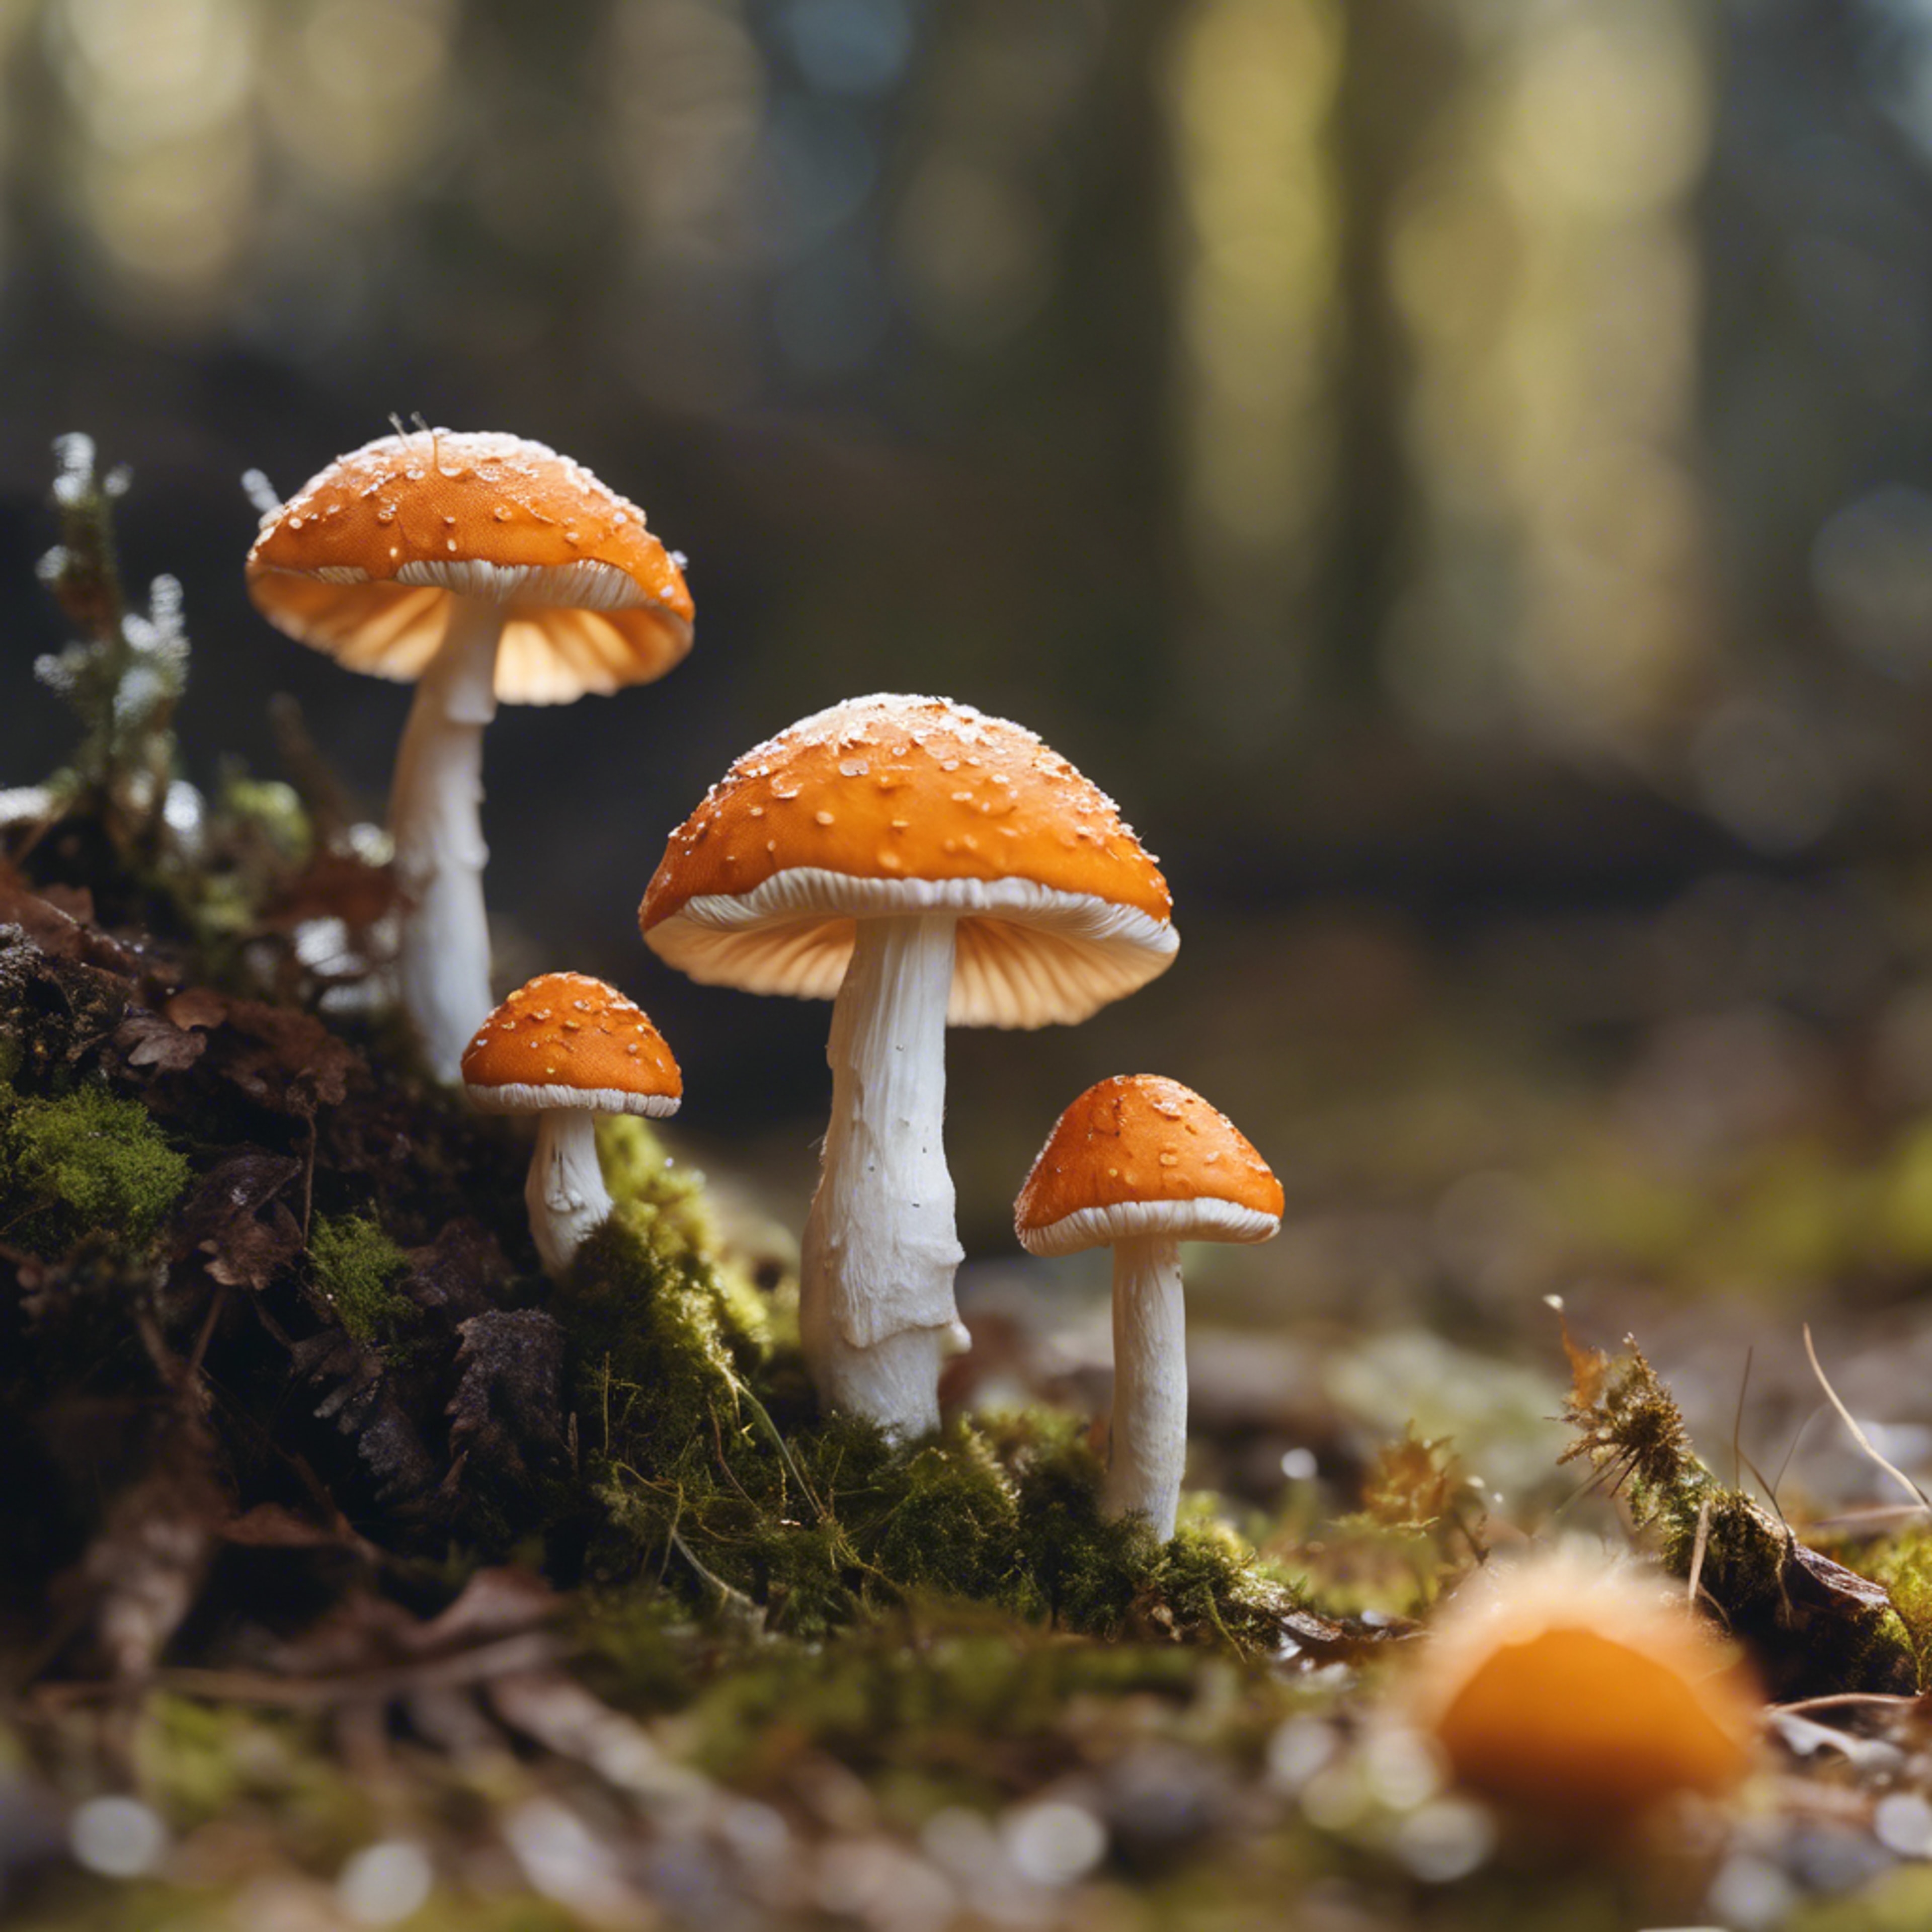 Miniature orange and white forest mushrooms photographed from a ground viewpoint壁紙[760e671b972345d3ad5e]